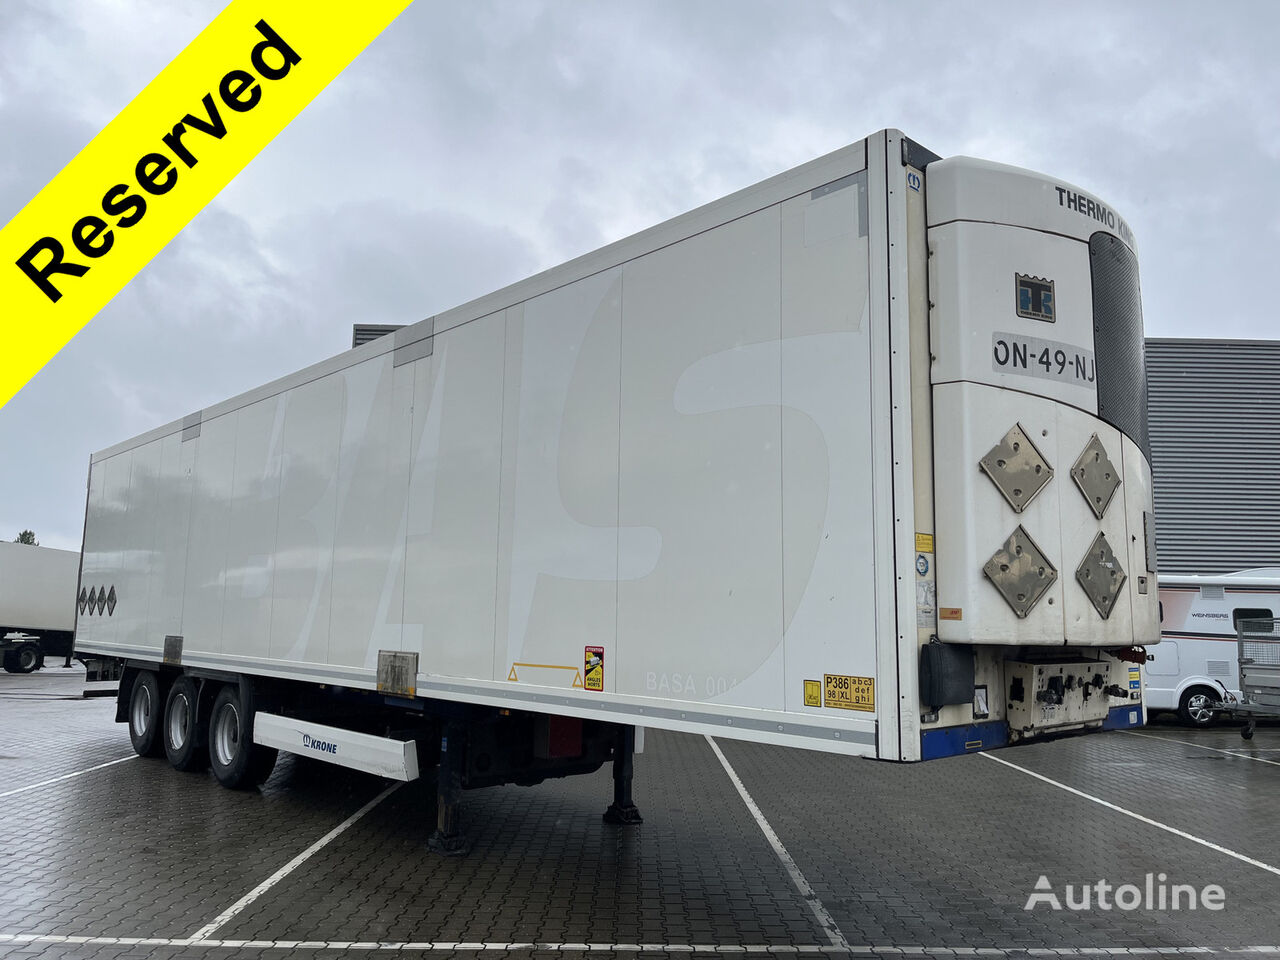 Krone Coolliner / Thermo King SLX 400 refrigerated semi-trailer